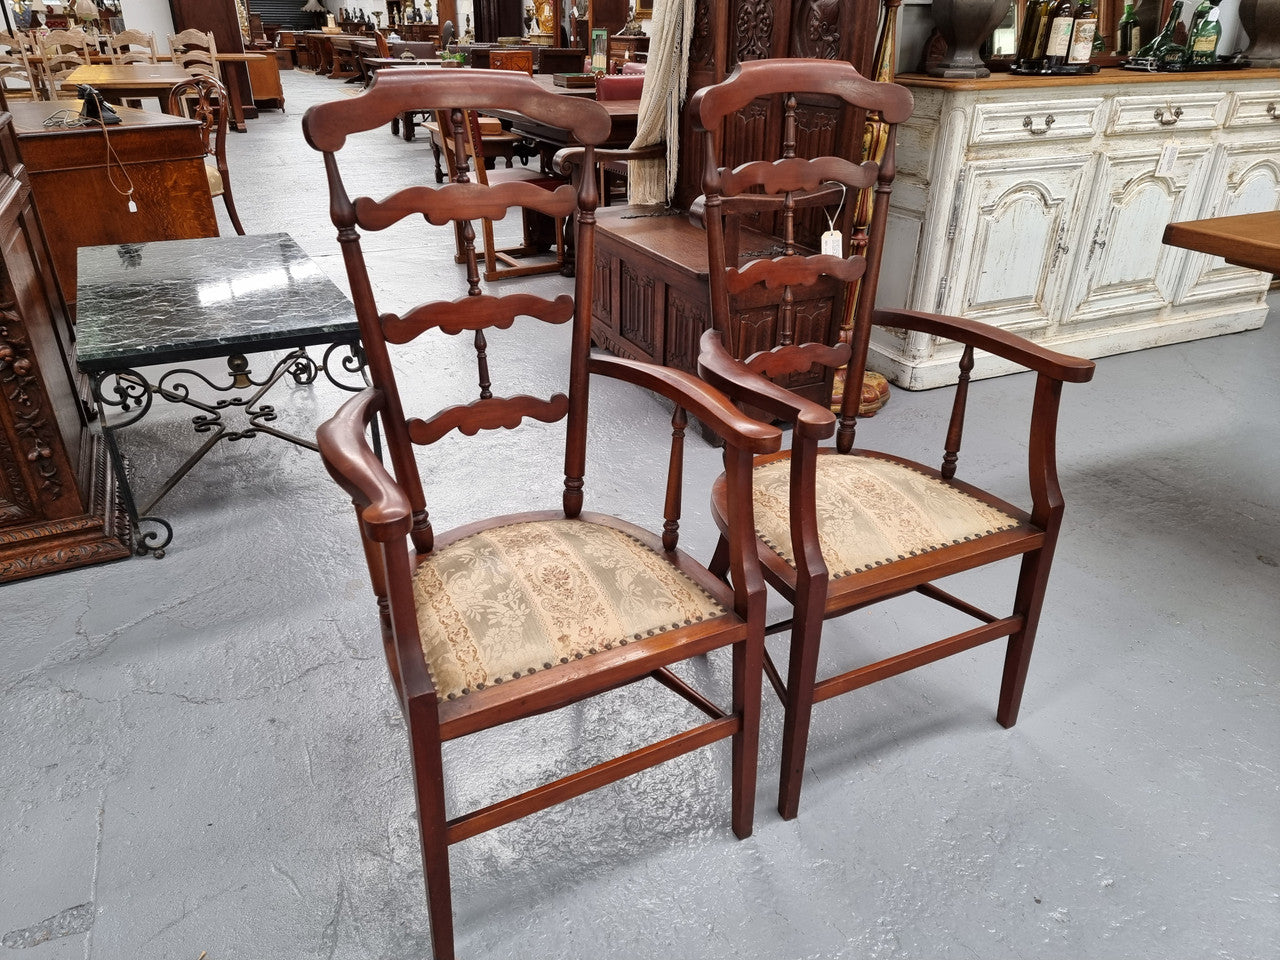 Pair of Mahogany Cottage Arm Chairs With Ladder Back